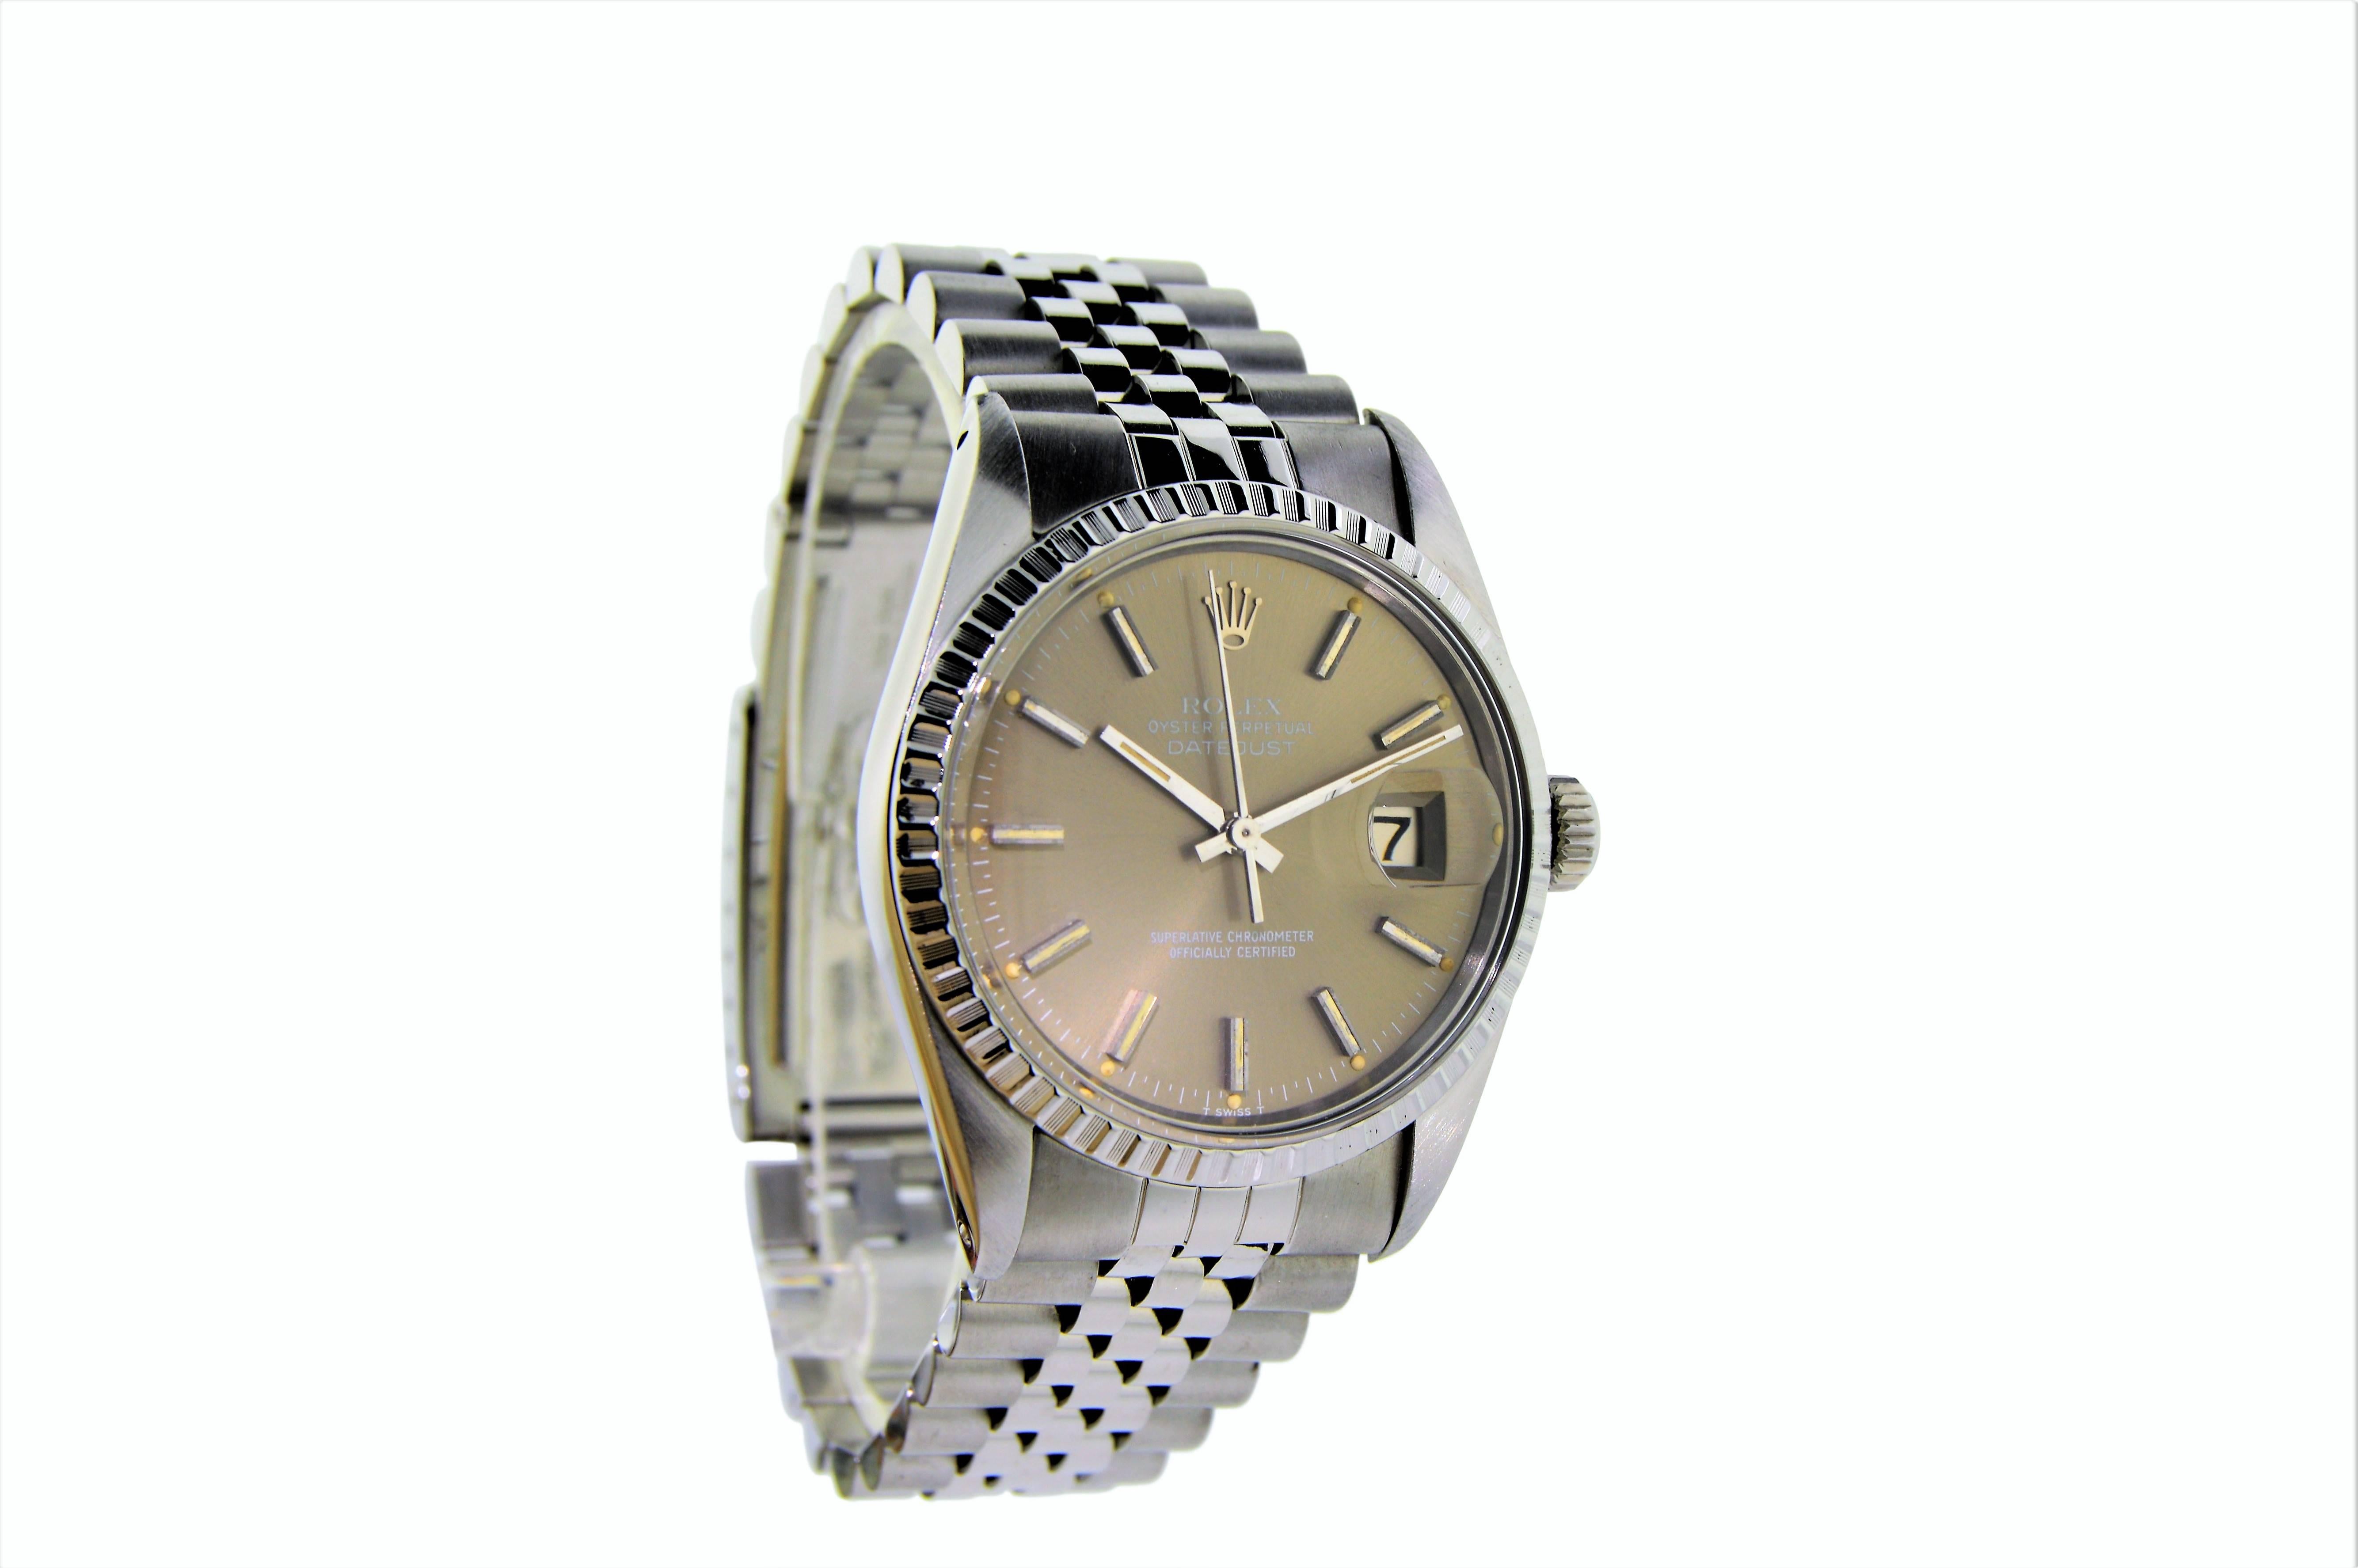 FACTORY / HOUSE: Rolex Watch Company
STYLE / REFERENCE: Datejust / Ref. 16030
METAL / MATERIAL: Stainless Steel 
DIMENSIONS:  44mm  X  36mm
CIRCA: Late 1970's
MOVEMENT / CALIBER: Perpetual Winding / 27 Jewels / Cal. 3035
DIAL / HANDS: Charcoal